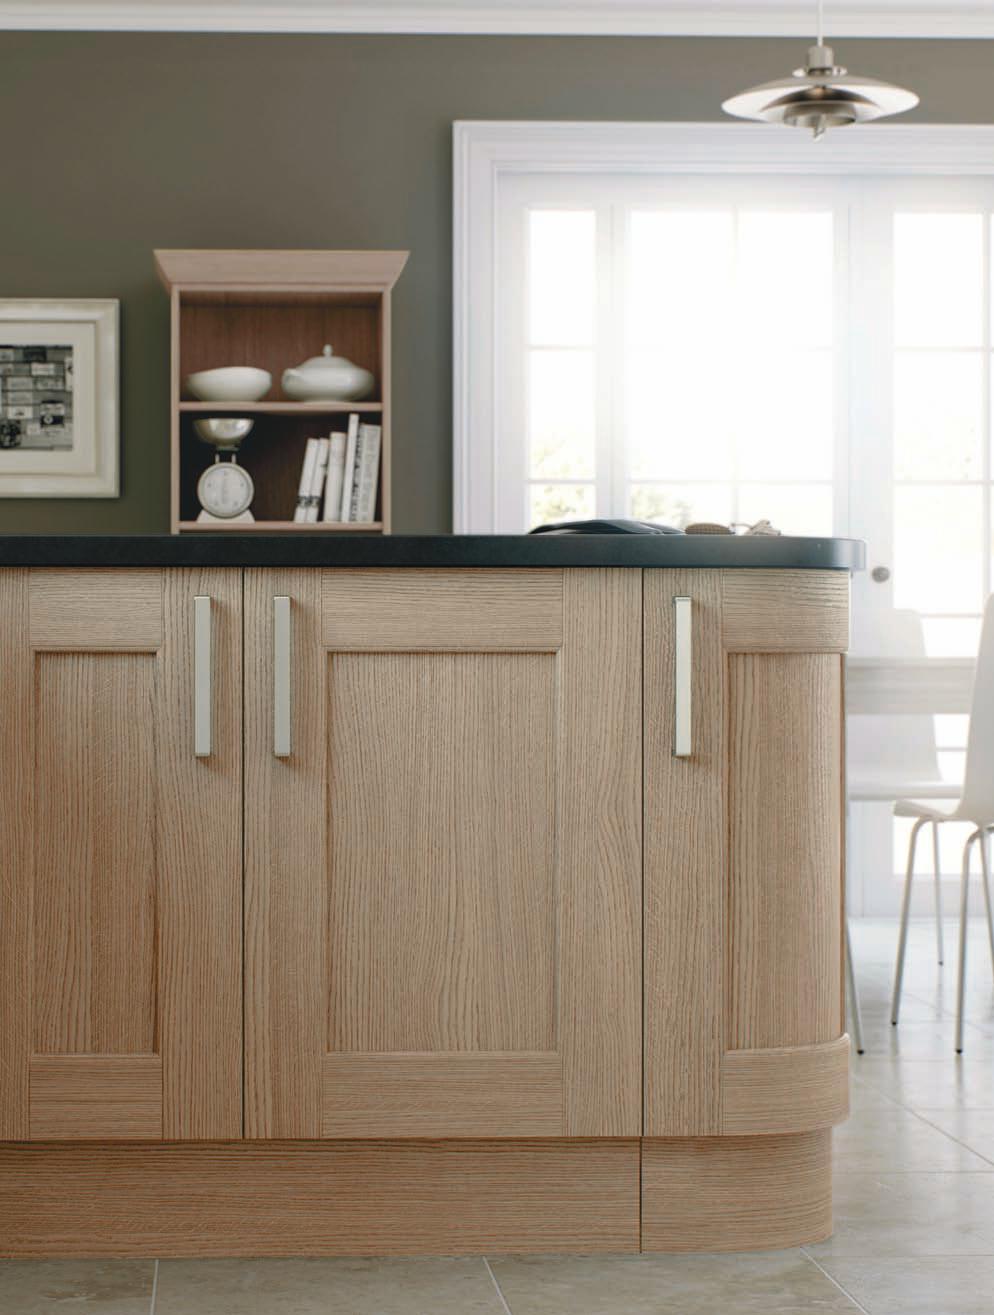 room. Kitchen islands are becoming more and more popular, used to increase work surface area or to sit and enjoy meals with